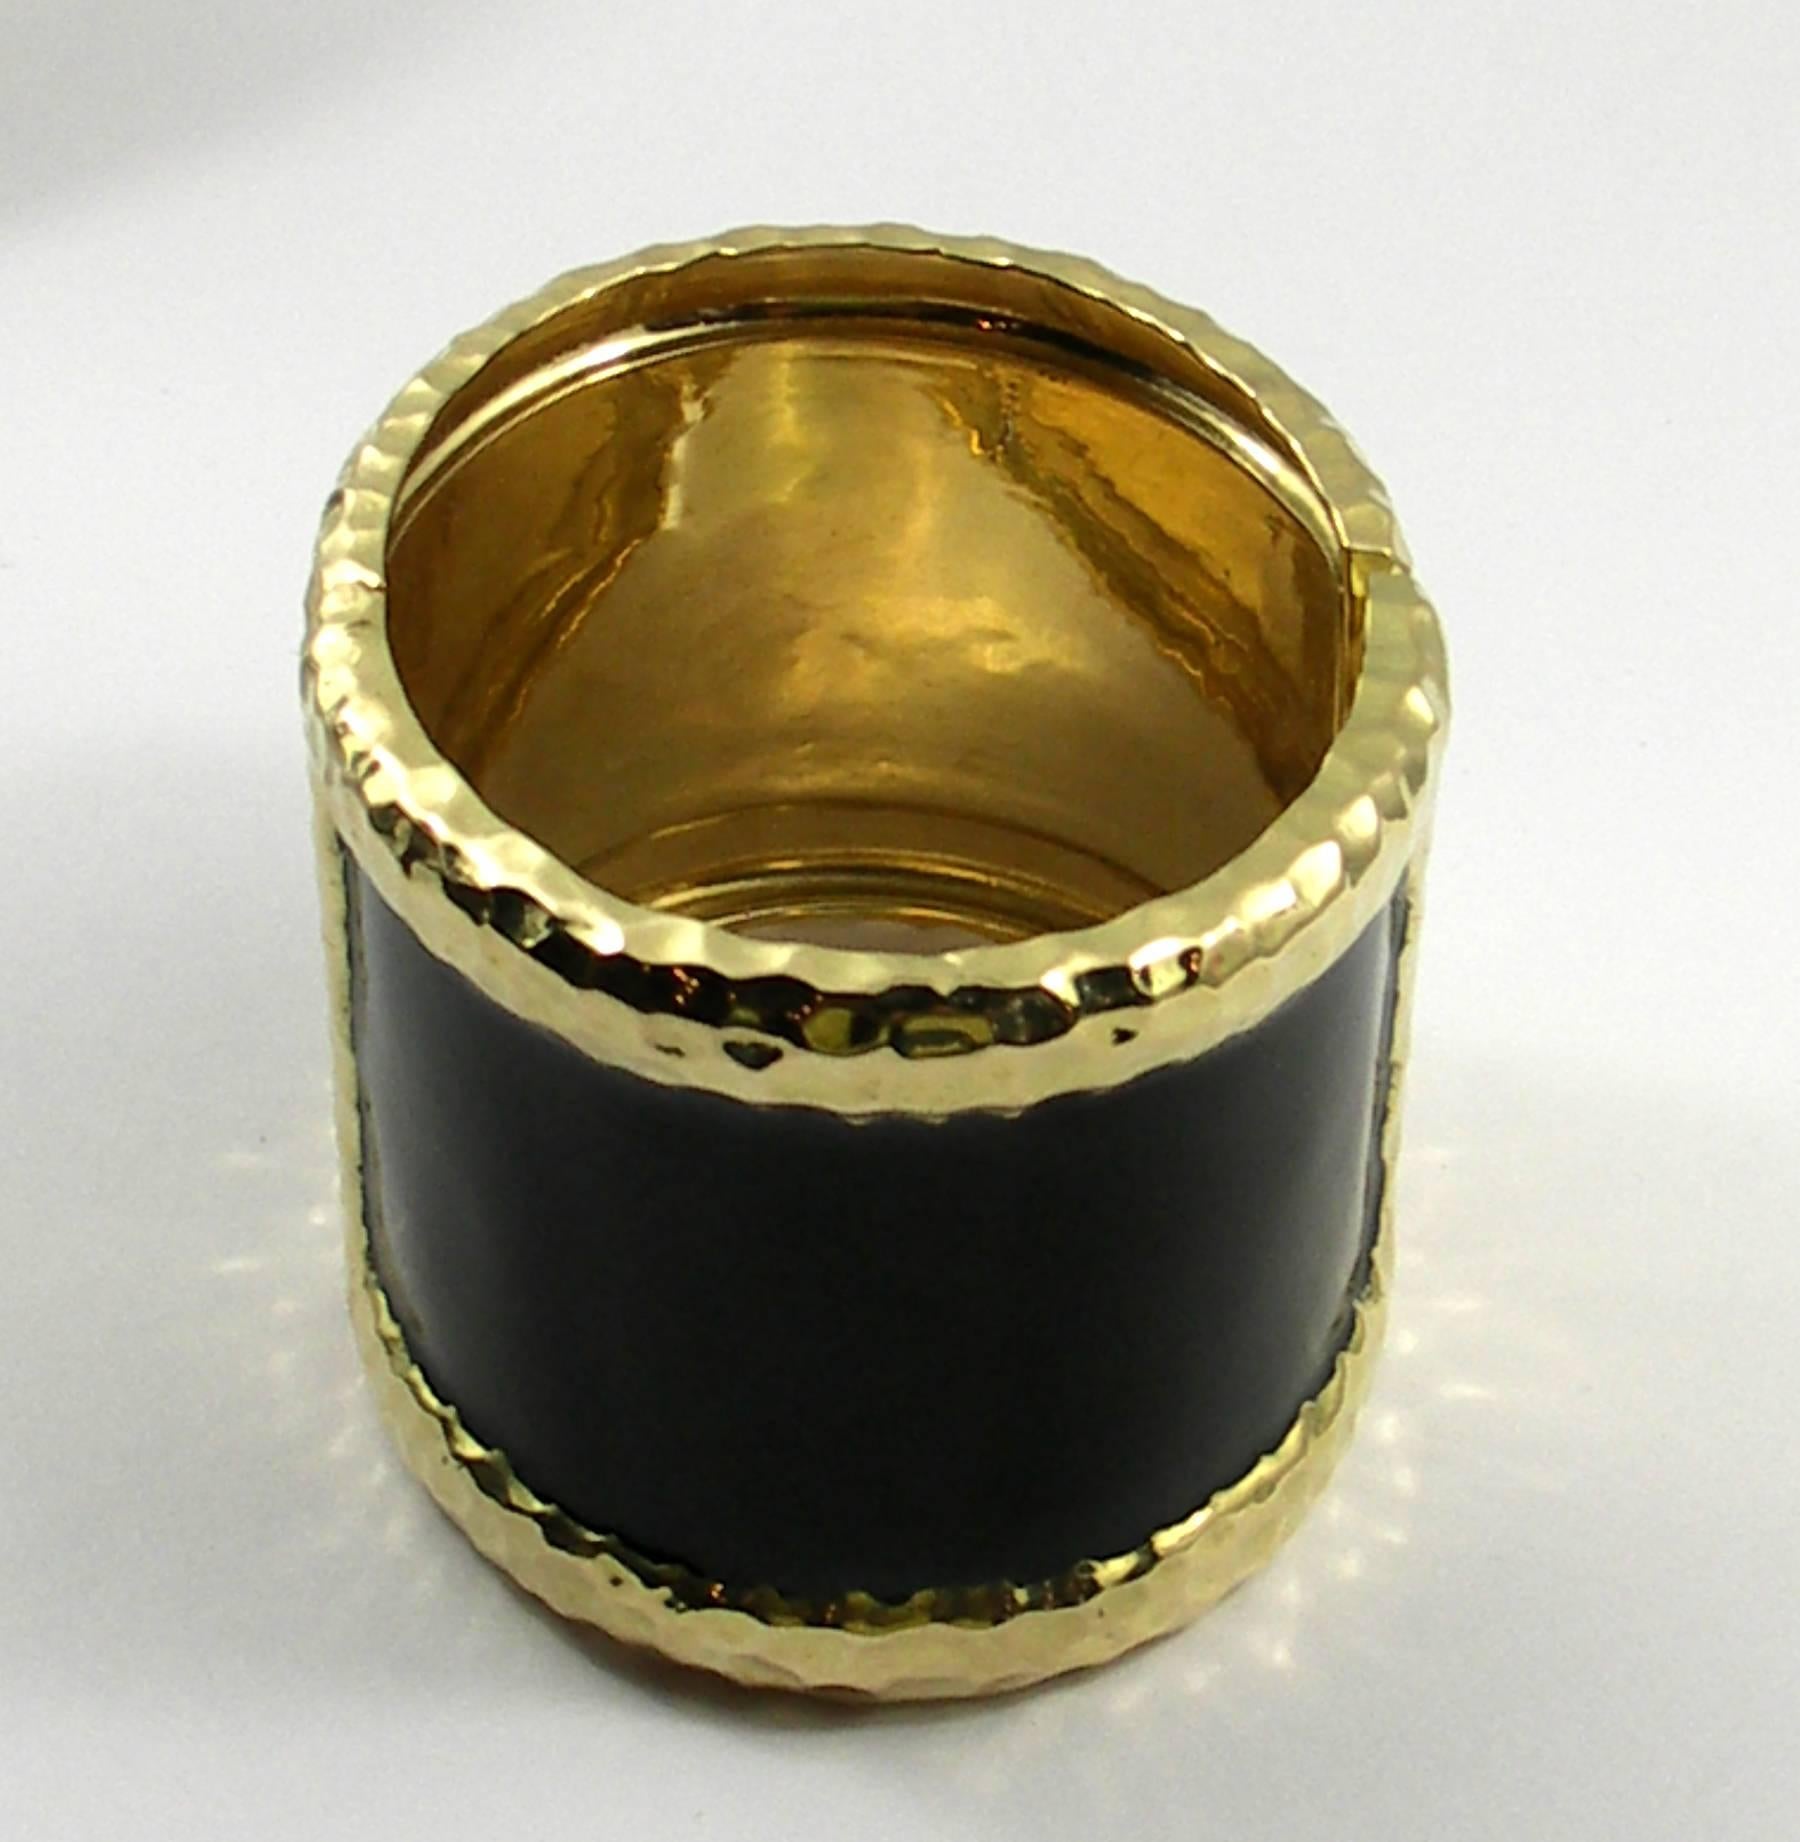 Women's Wide Yellow Gold Cuff Bracelet with Hammer Finish and Black Enamel